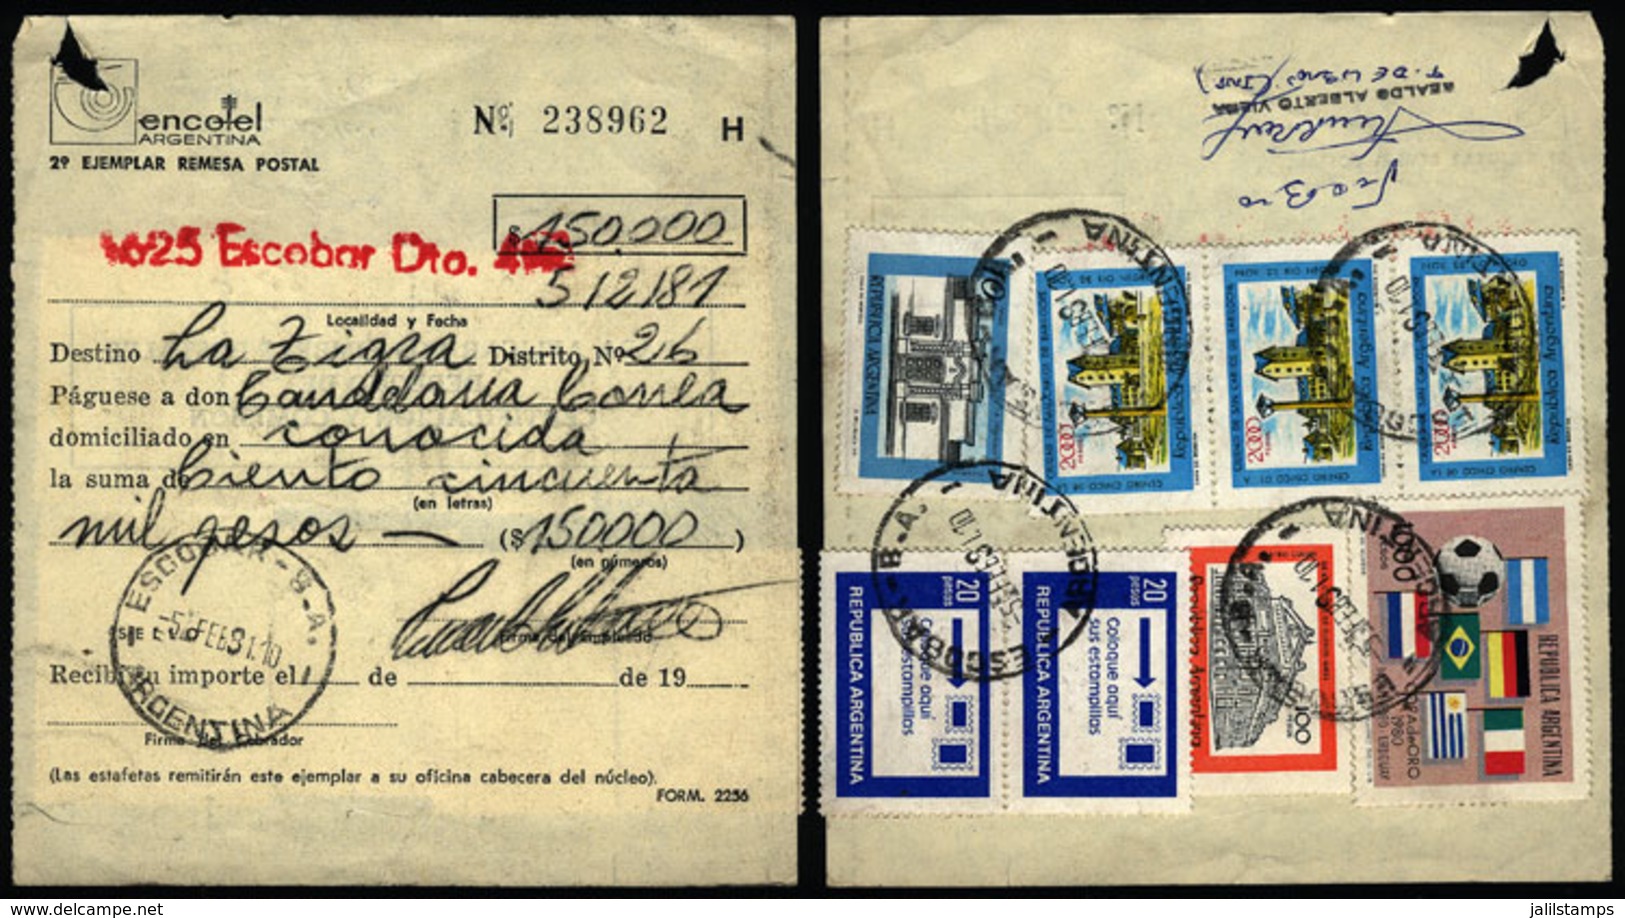 ARGENTINA: Postal Money Order Sent On 5/FE/1981 With Postmark Of "ESCOBAR" To La Trigra, With INFLA Postage Of $7,150." - Lettres & Documents